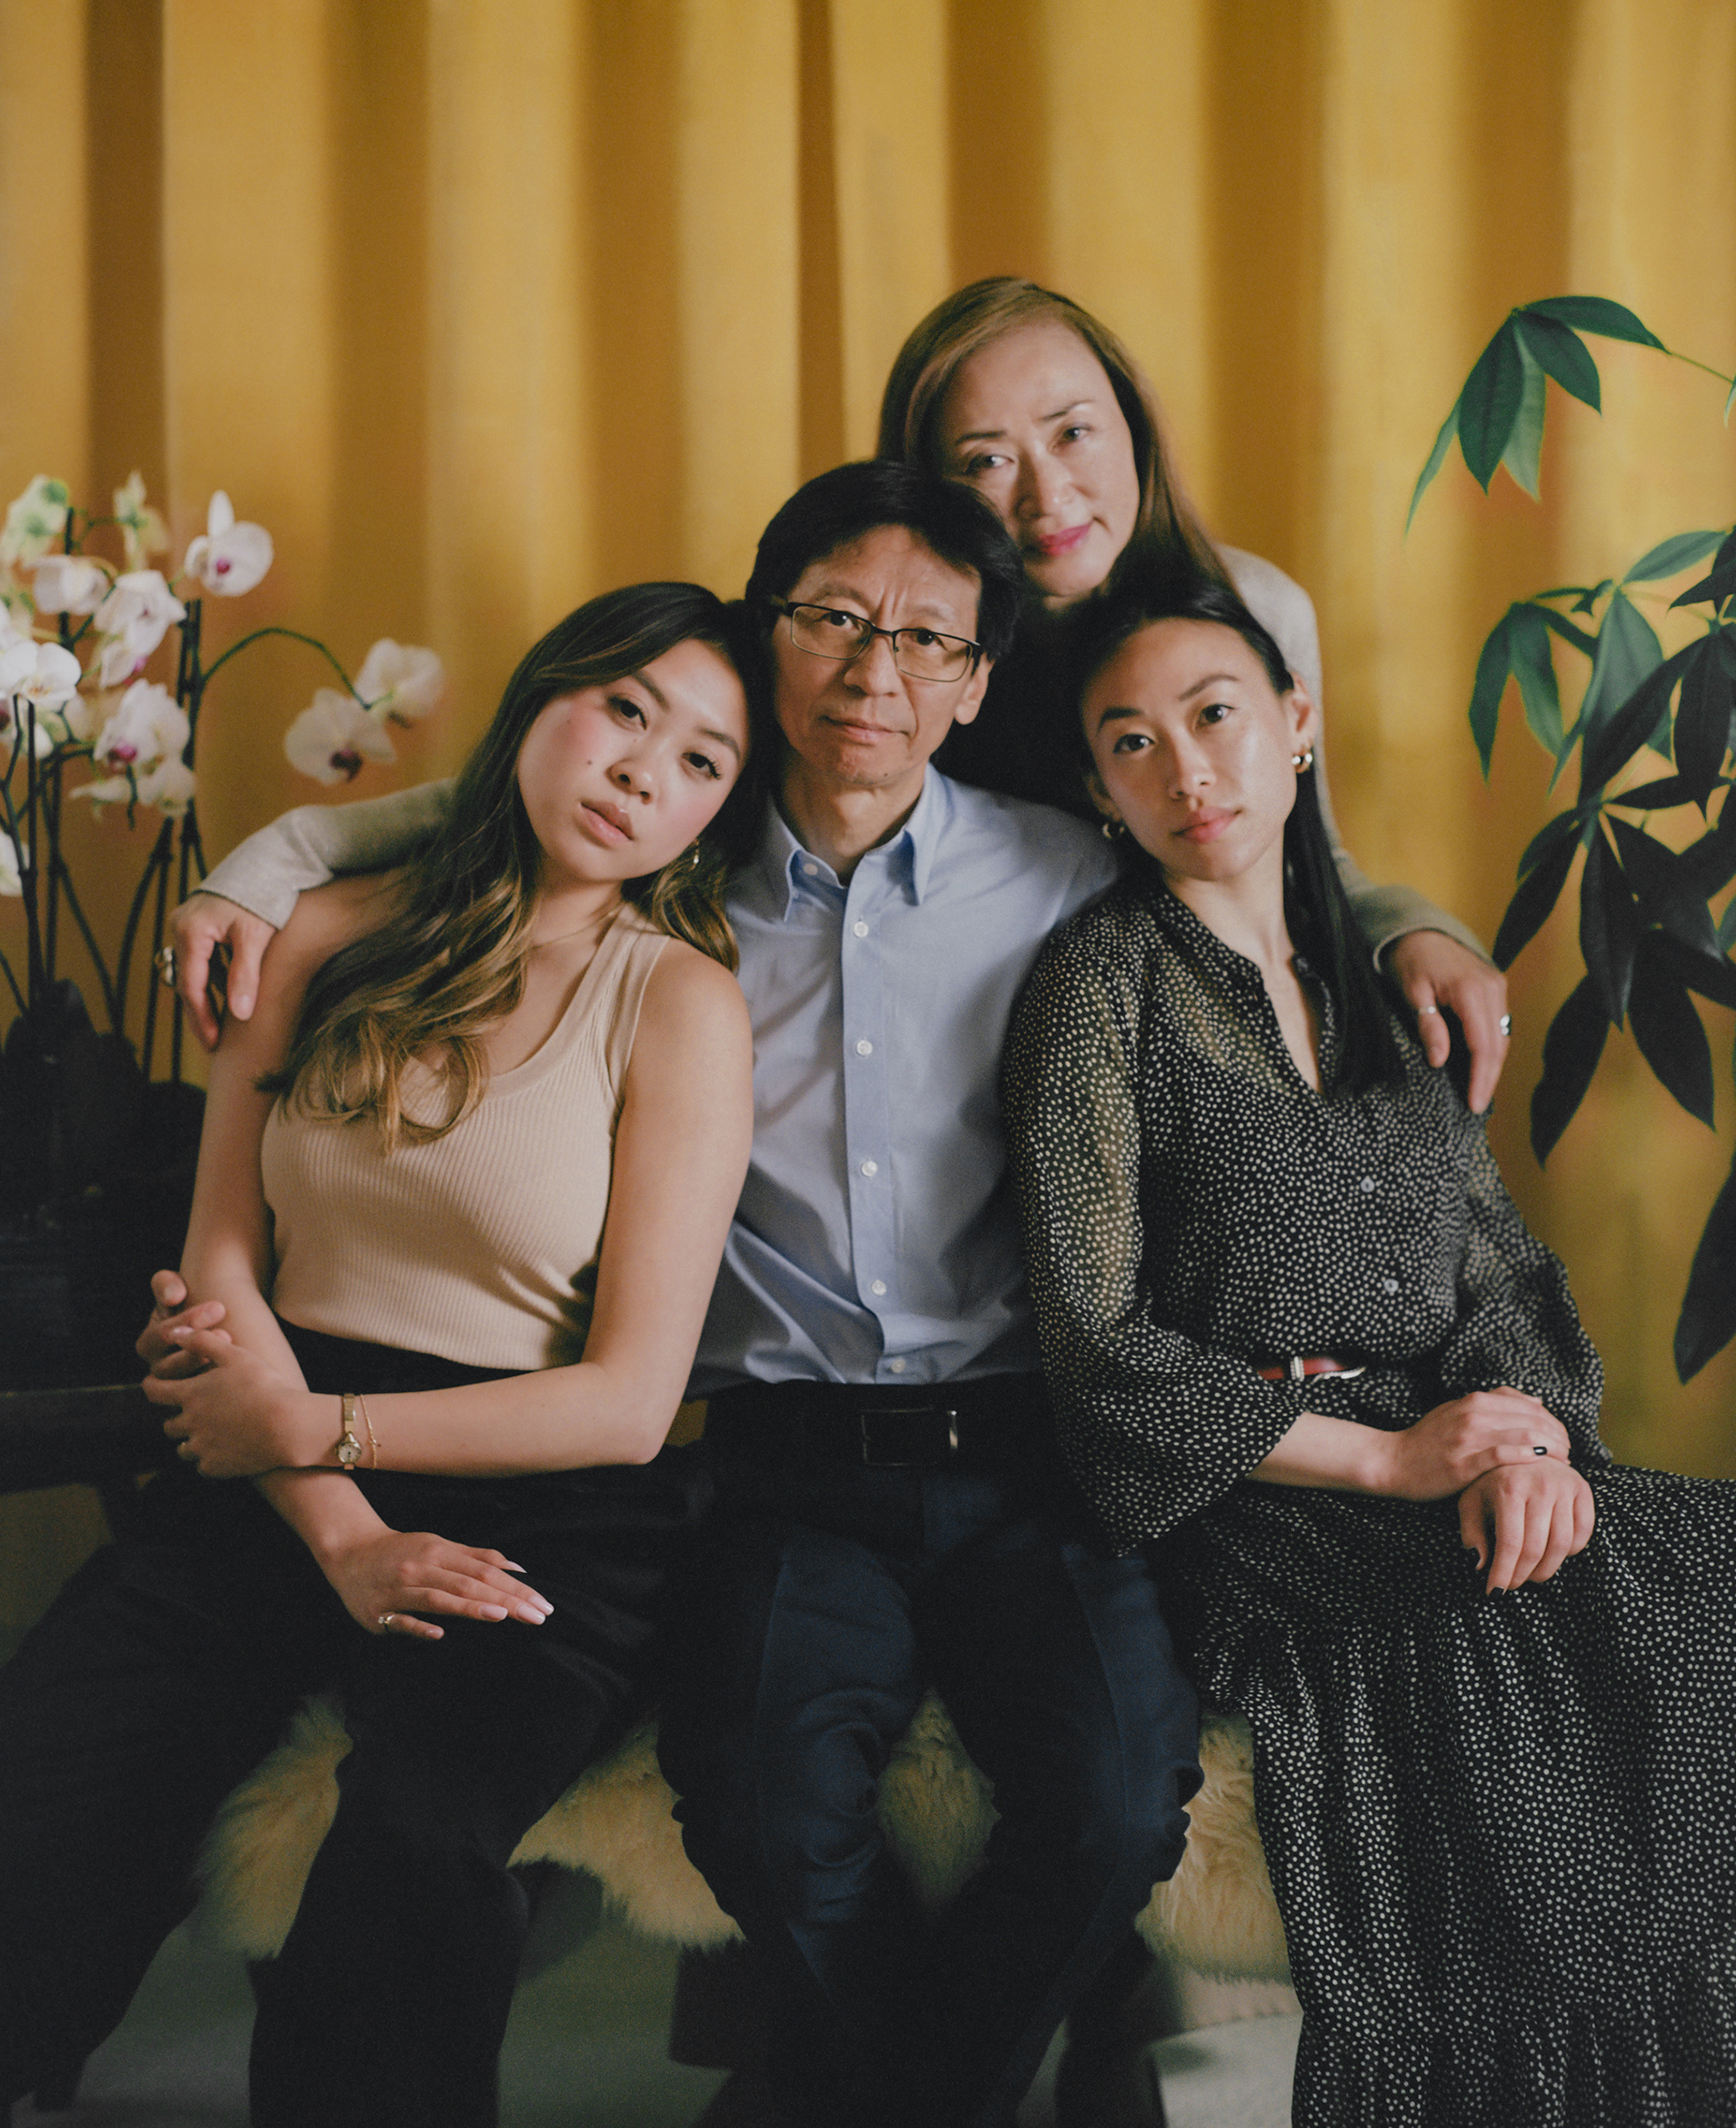 <strong>'HE ISN'T A VICTIM.' </strong>Carl Chan, center, sits with his daughters Crystal Chan, right, and Emerald Chan, left, and his wife Eleanore Tang, above, at home in Alameda, Calif., on May 18. As president of the Oakland Chinatown Chamber of Commerce, Carl, 62, has long made the protection of local elders a priority in his work. When attacks against Asian Americans started increasing in 2020, he ramped up his efforts, handing out whistles and air horns to anyone on the street who would take them. “We respect the elderly,” he says. “To me, to us, to our community, it is the worst when they are attacking our seniors.” Carl’s daughters worried about their father’s safety as he spent his time in areas where incidents of violence had taken place. “What he’s doing is so important,” Crystal, 28, remembers thinking. “While there is a risk, we just can’t keep thinking about that.” On April 29, when Carl was on his way to visit an older Asian man who had been assaulted on a bus, he also fell victim to an unprovoked attack. He remembers hearing a man screaming and yelling a racial slur. Then he describes “a quick punch to my head.” Crystal said the emotions overwhelmed her quickly; first shock, then anger and sadness. She and her sister, who live across the country in New York, flew home as soon as they could. “It’s not easy for our family, especially [when] the ones close to you become the victim,” Eleanore says. “It’s so hard. It’s so hard.” But Carl, scraped and bruised, emerged from the attack even more determined. On May 15, he walked side by side with his daughters and wife in a “Unity Against Hate” rally that he helped organize. “While he was physically assaulted, he isn’t a victim,” says Emerald, 24. “He’s showing that he’s strong.” (Emanuel Hahn for TIME)